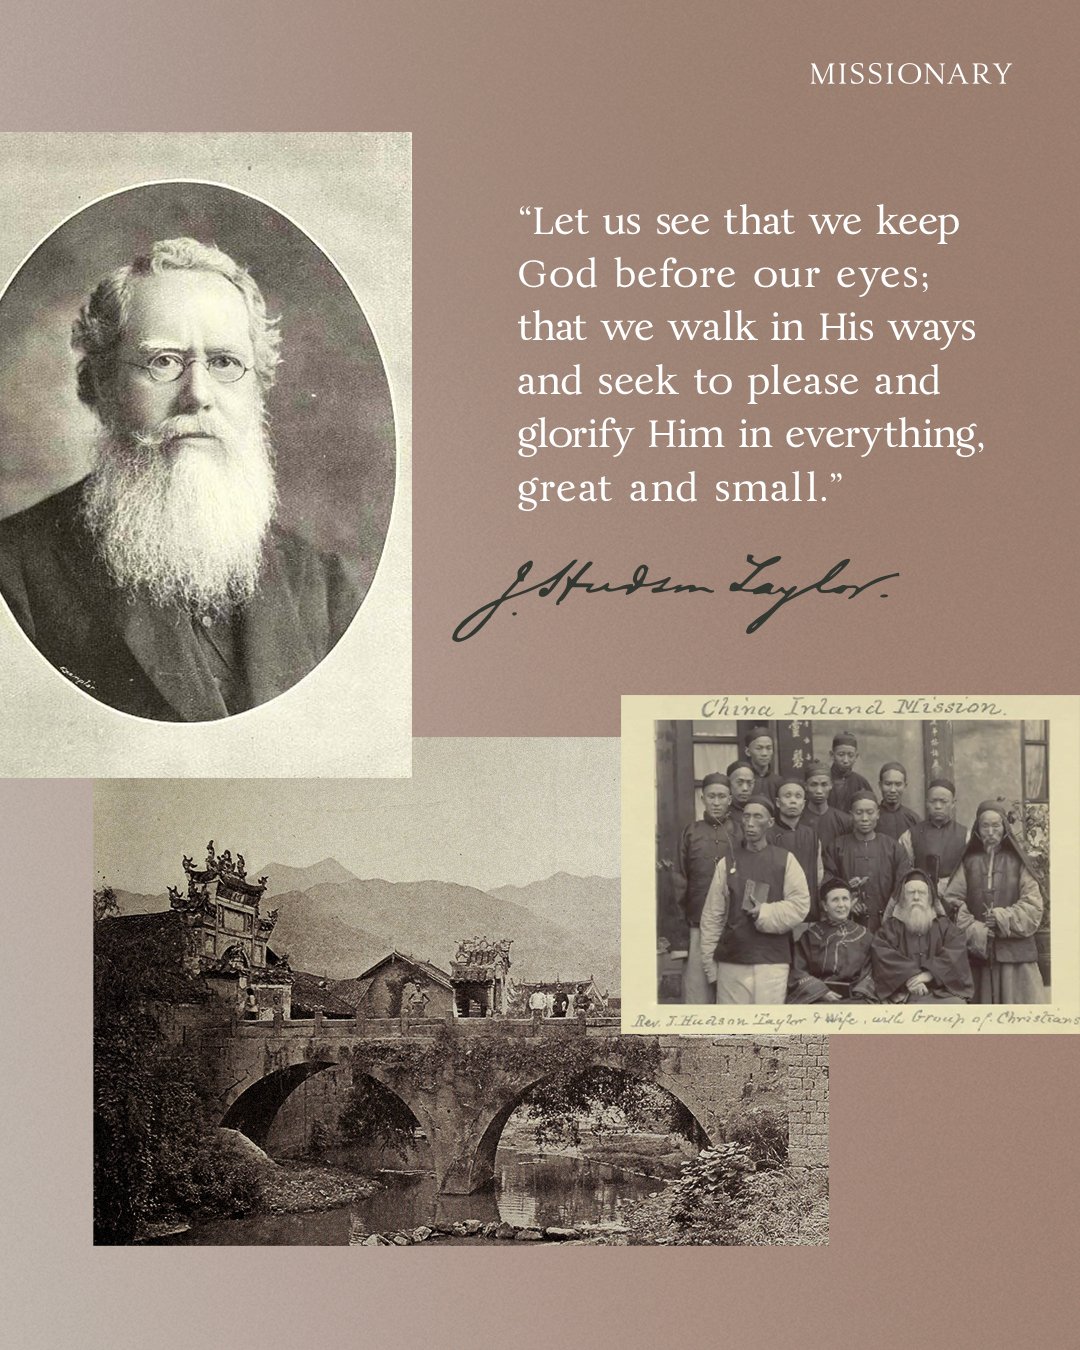 &ldquo;Let us see that we keep God before our eyes; that we walk in His ways and seek to please and glorify Him in everything, great and small.&rdquo; ー Hudson Taylor